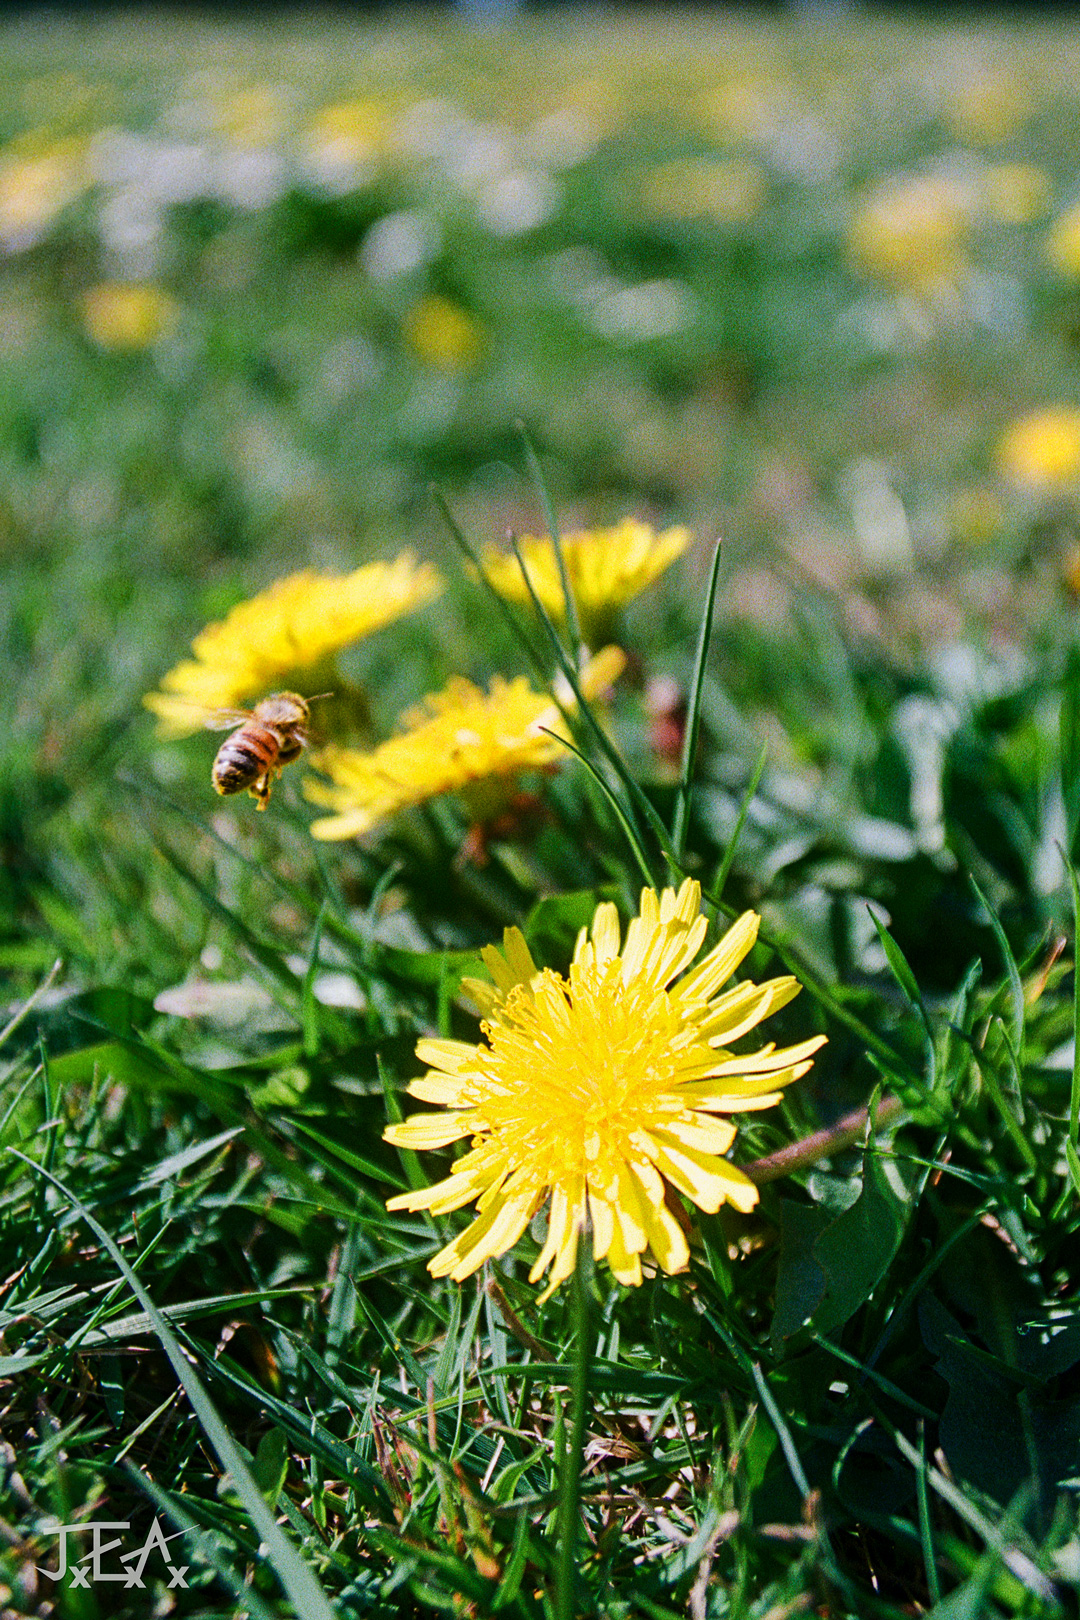 A bee caught mid air as it lands on a bright yellow dandelion in a green field.